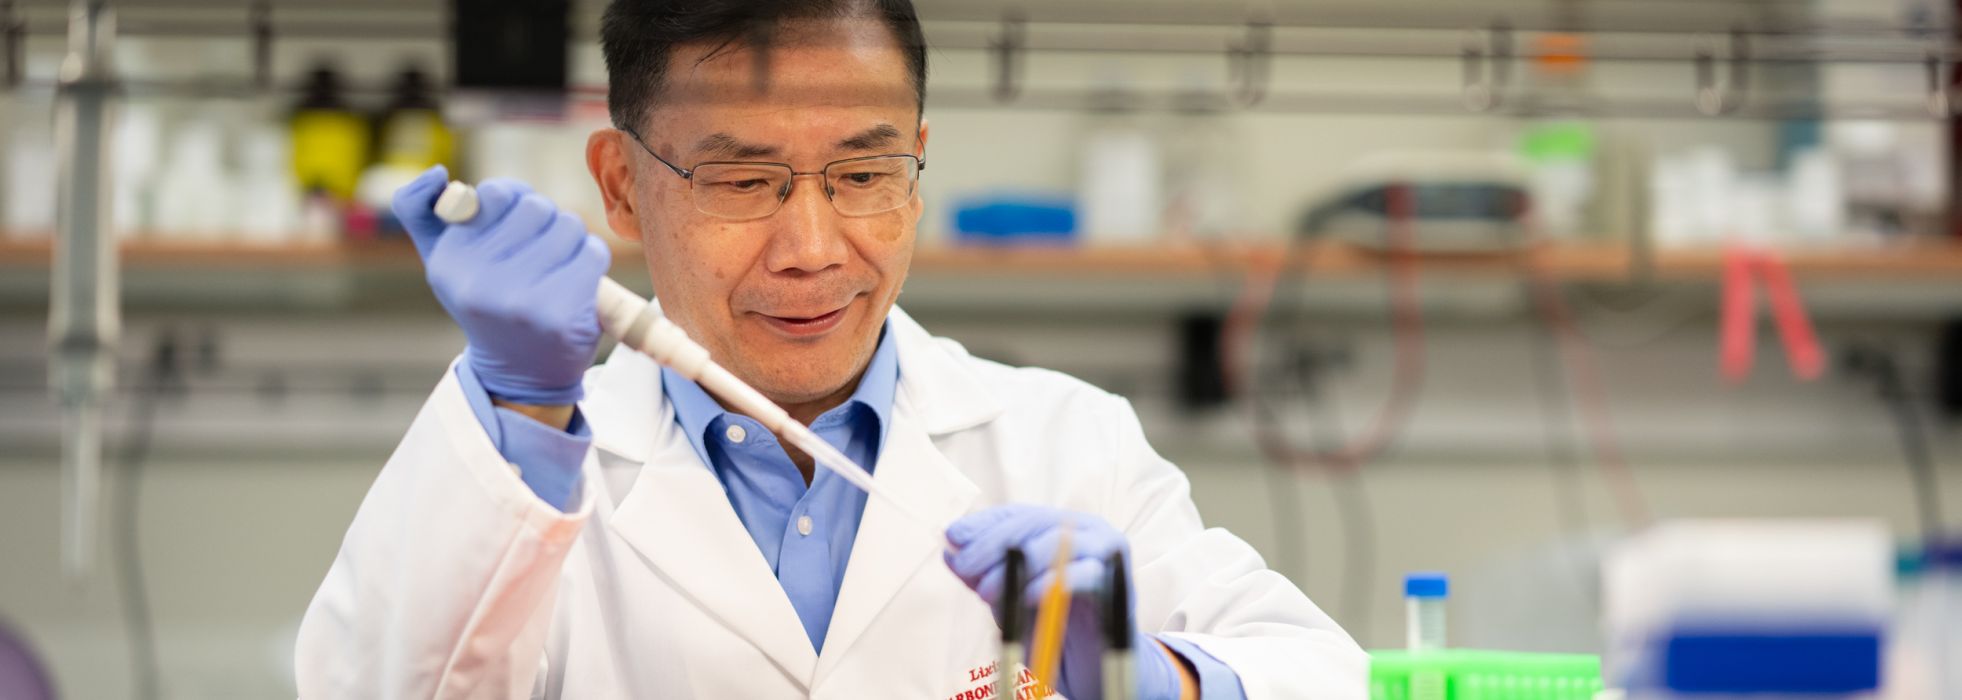 photo of Dr. Lixin Rui wearing a white lab coat and using a pipette at a lab bench